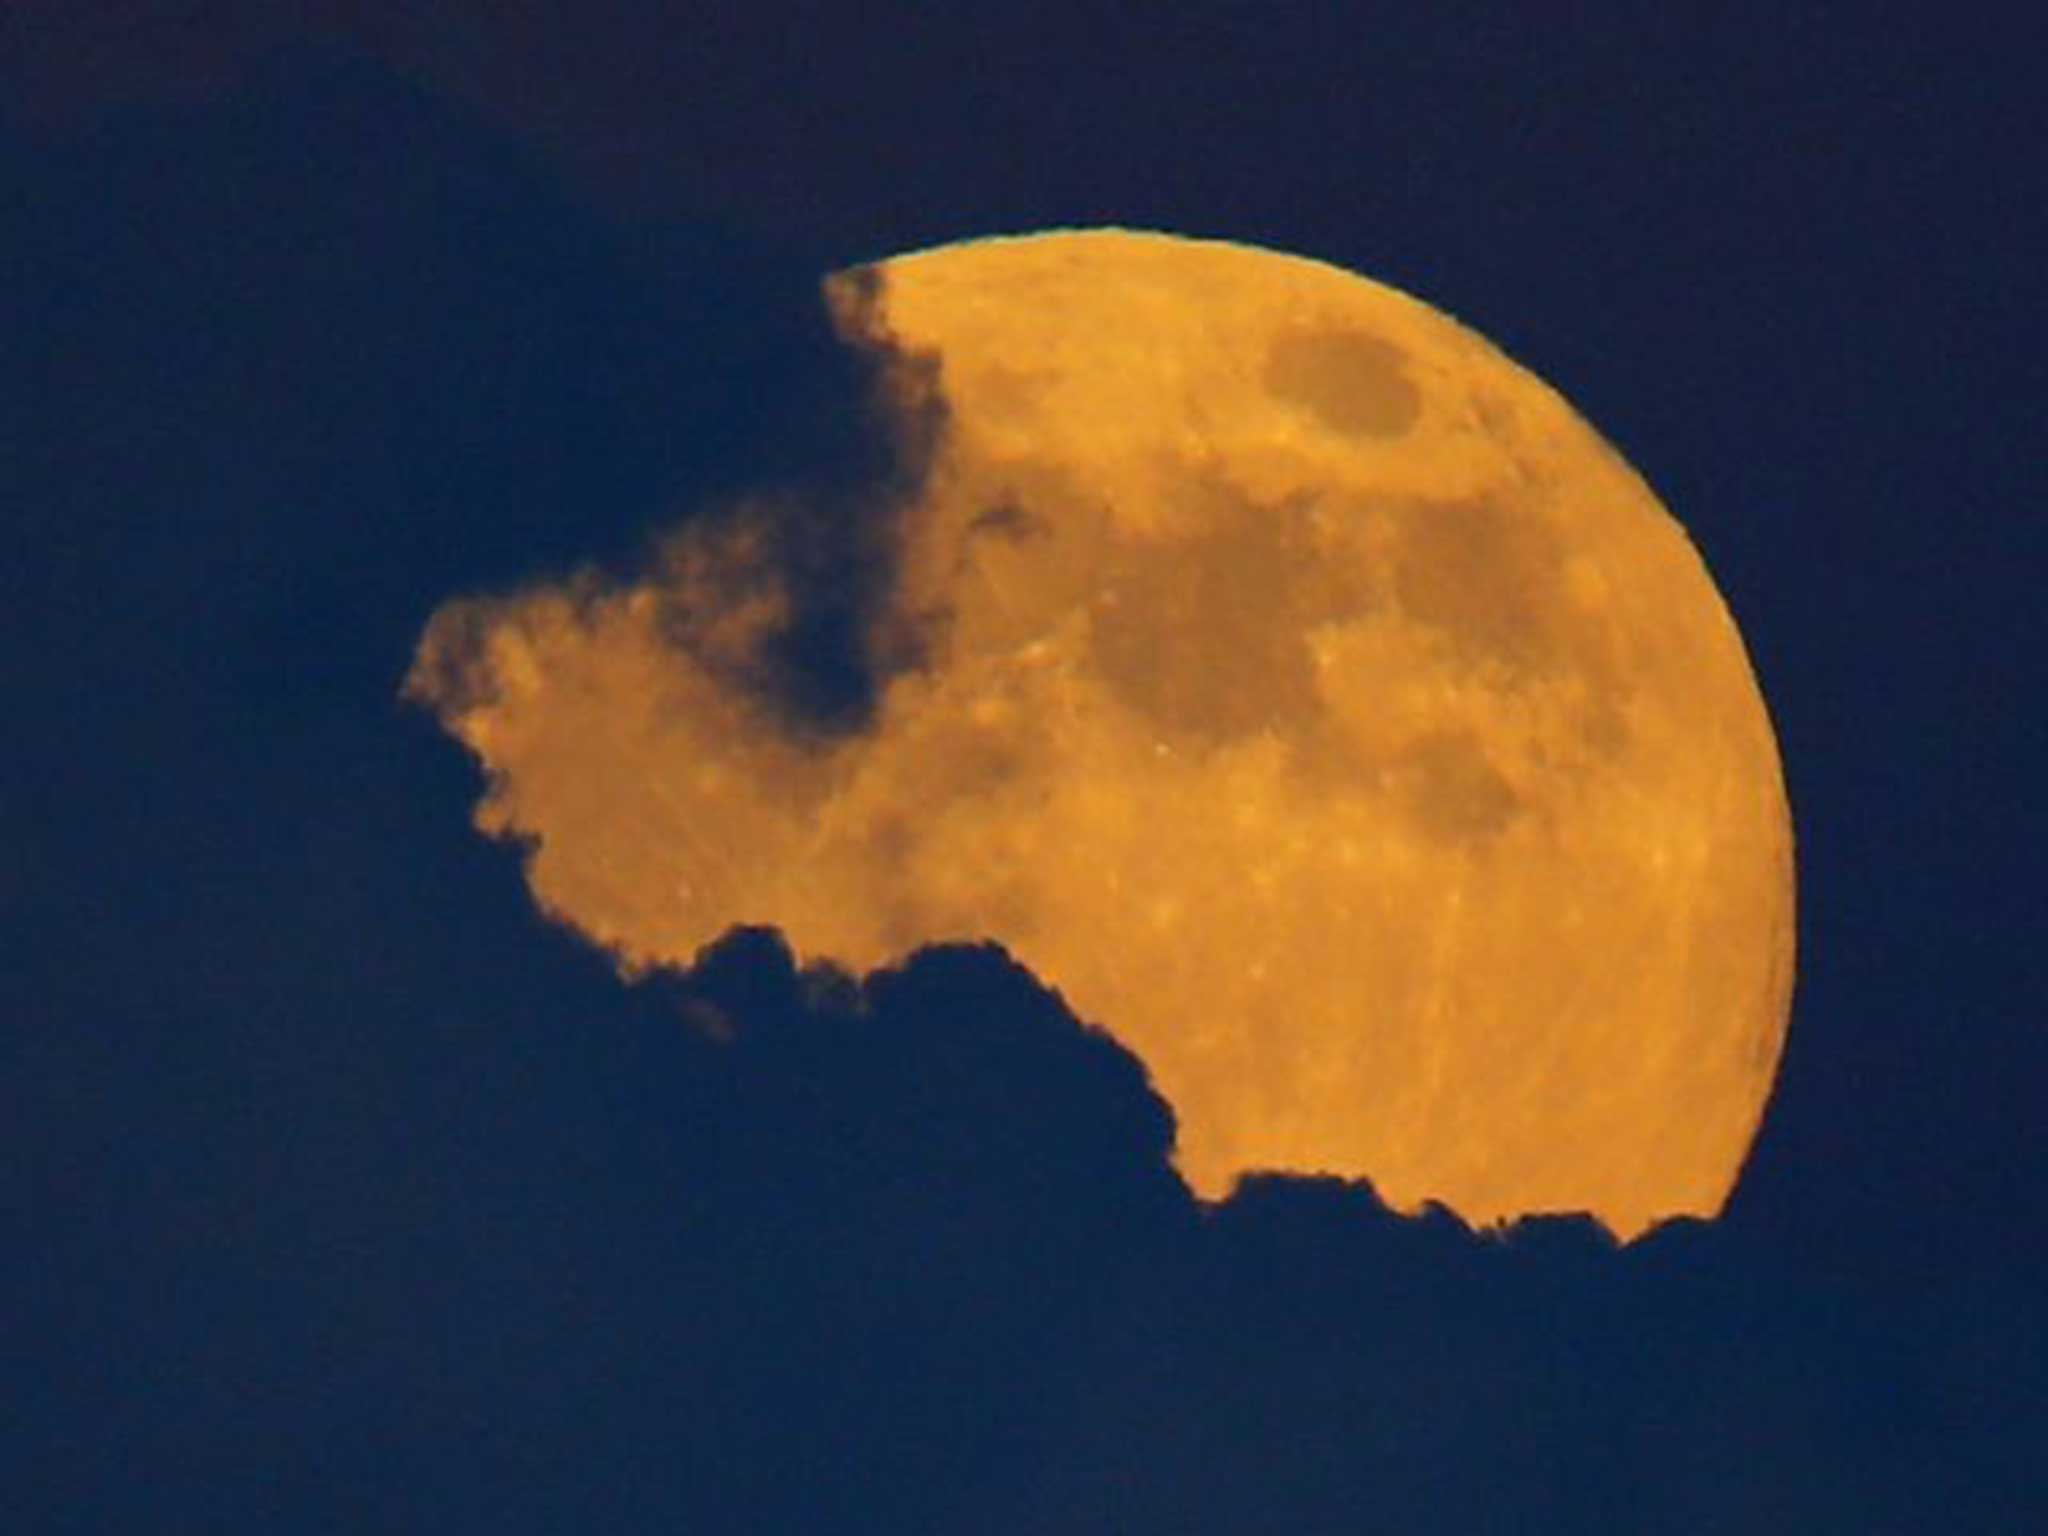 A full moon, also a Harvest moon, over California yesterday